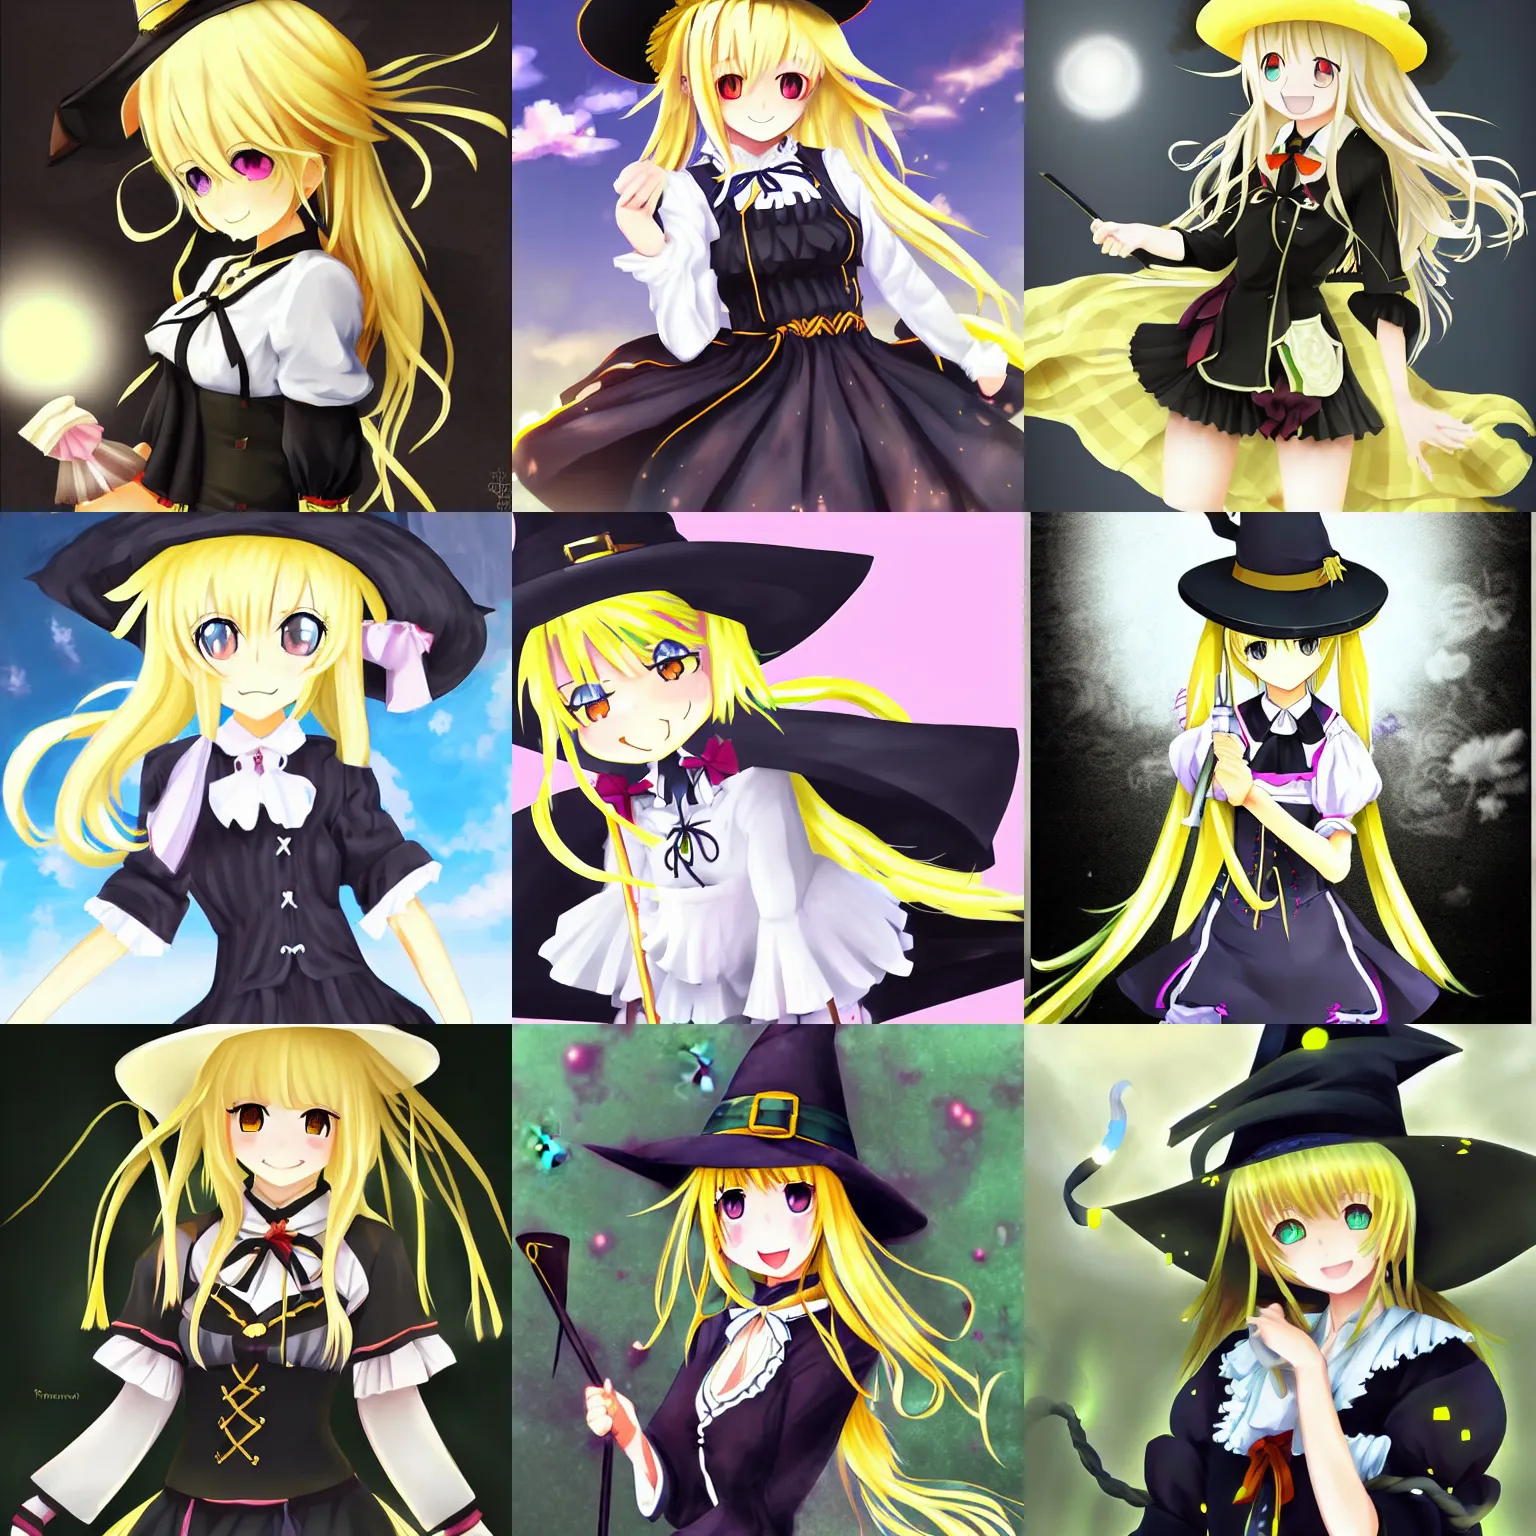 Prompt: pixiv artwork portrait of cute witch marisa kirisame from touhou project, marisa kirisame touhou artwork black hat broom blonde hair finely detailed yellow eyes maid dress white apron